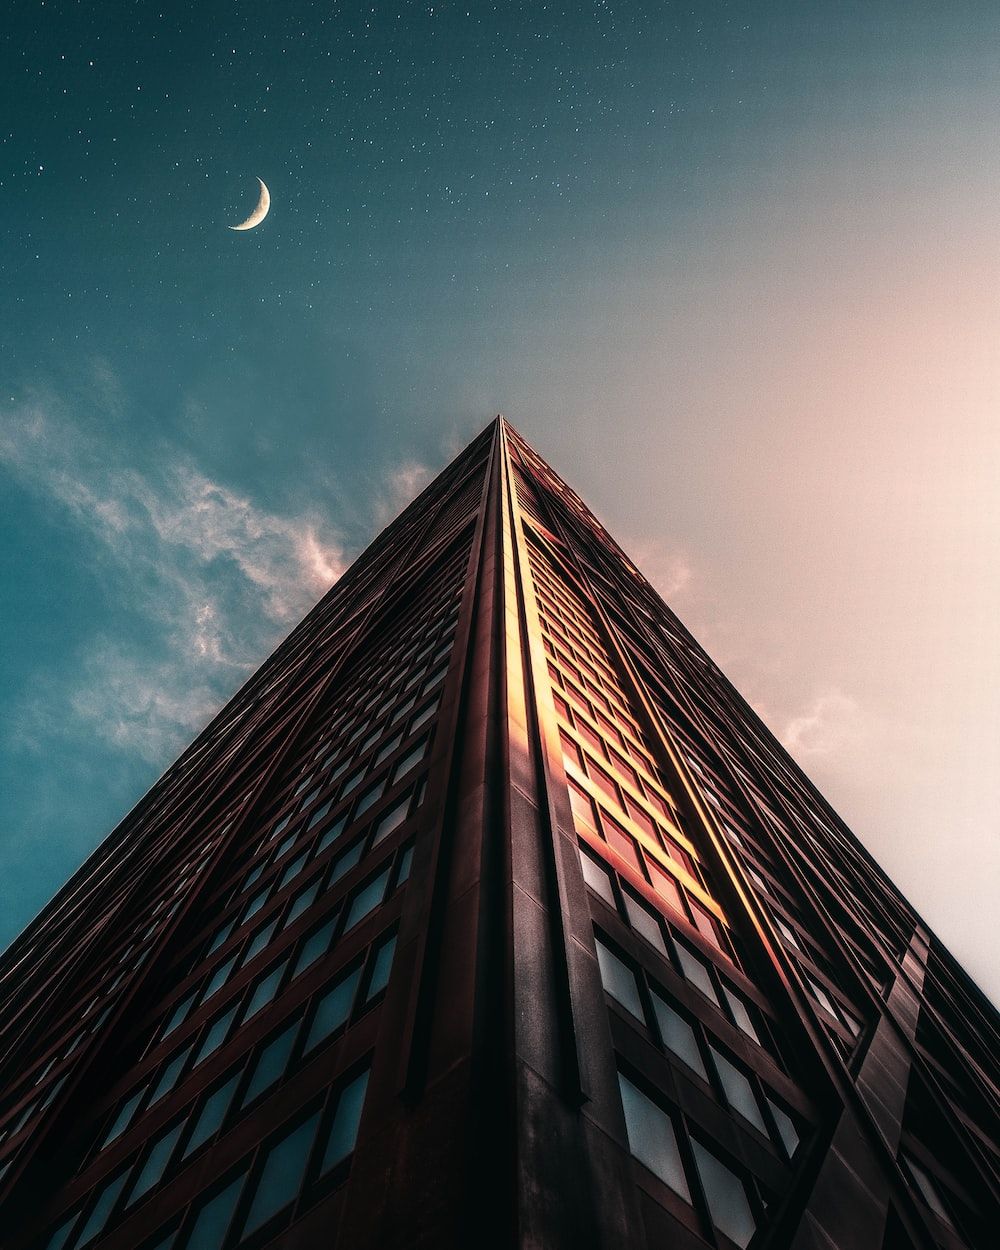 A tall building with the moon in front of it - Chicago